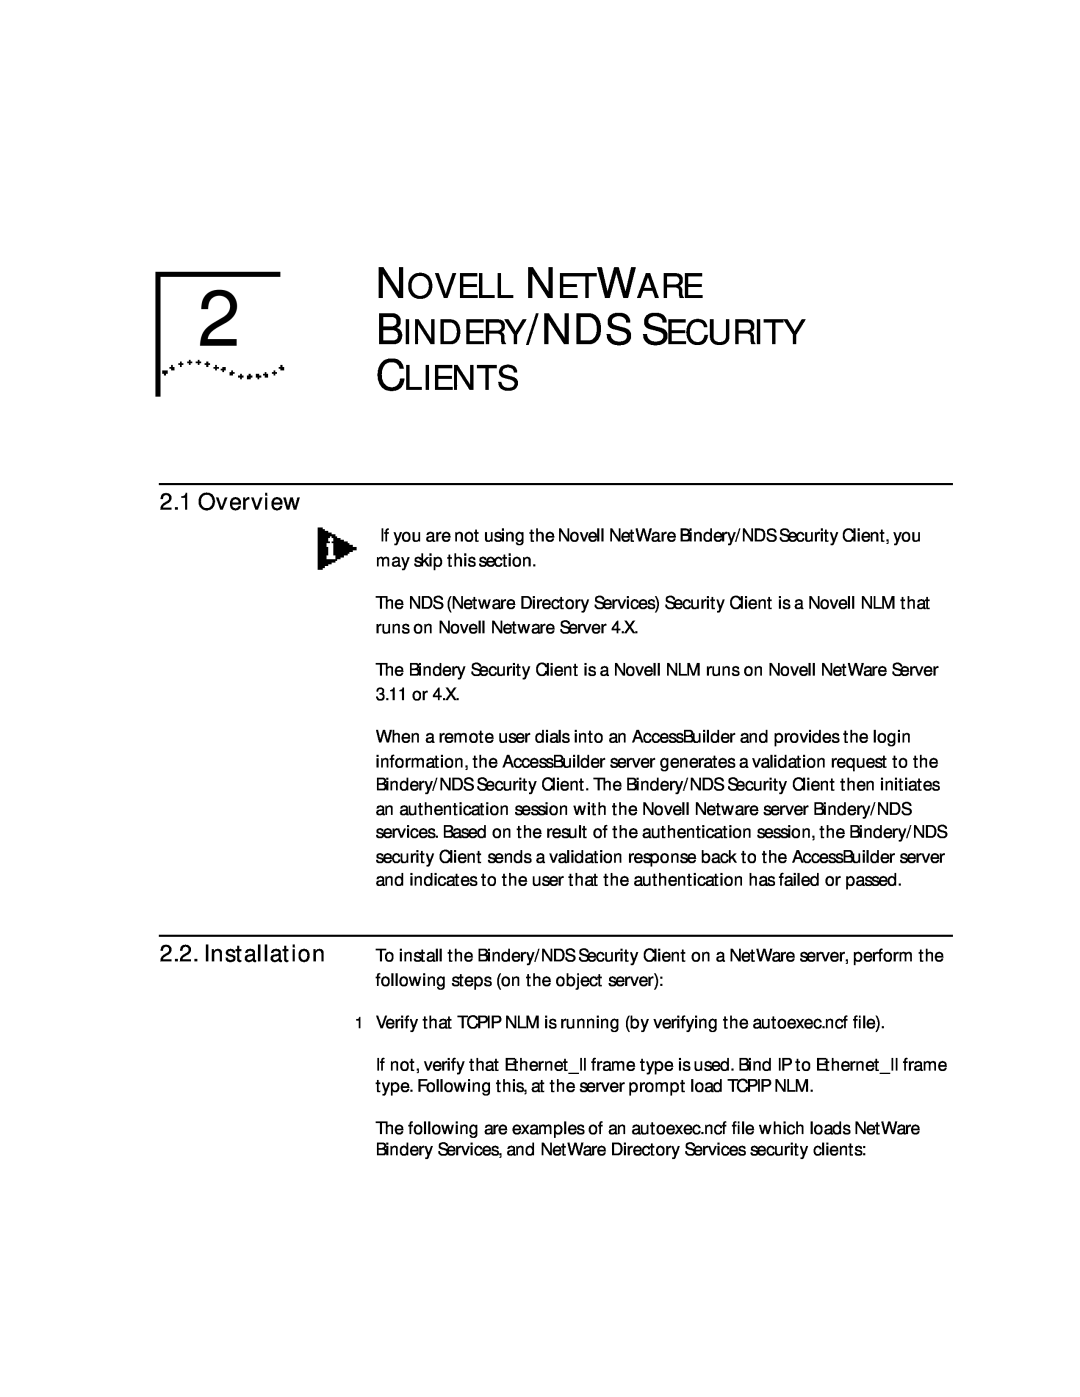 3Com 09-0704-001 manual NOVELL NETWARE 2 BINDERY/NDS SECURITY CLIENTS, Overview 